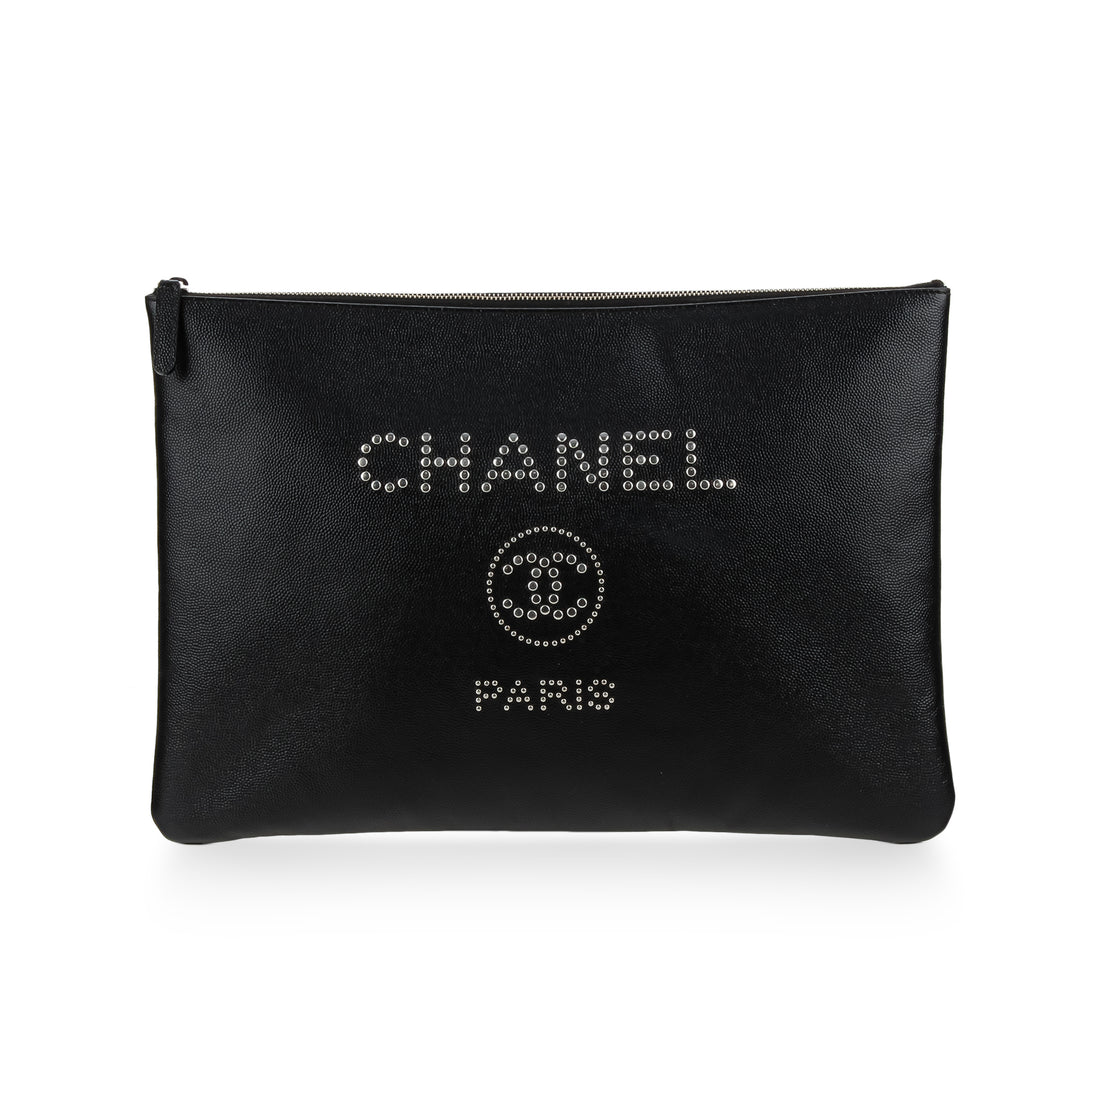 CHANEL Deauville Studded O Case - Black Caviar Leather